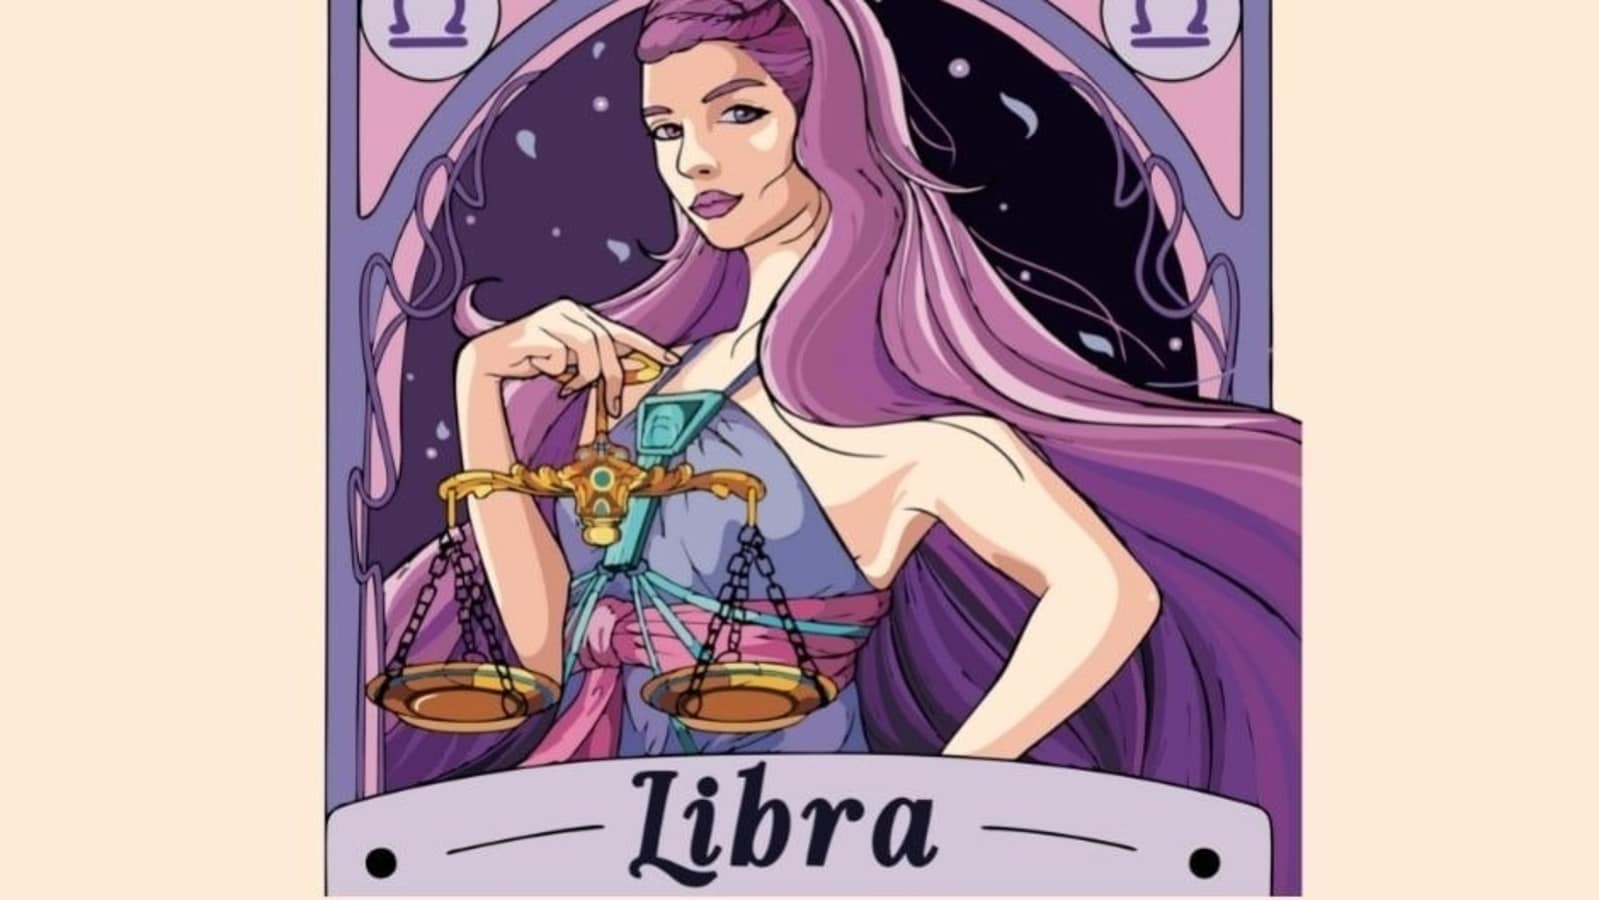 Libra Horoscope Today: Daily predictions for June 27, '22 states, career growth